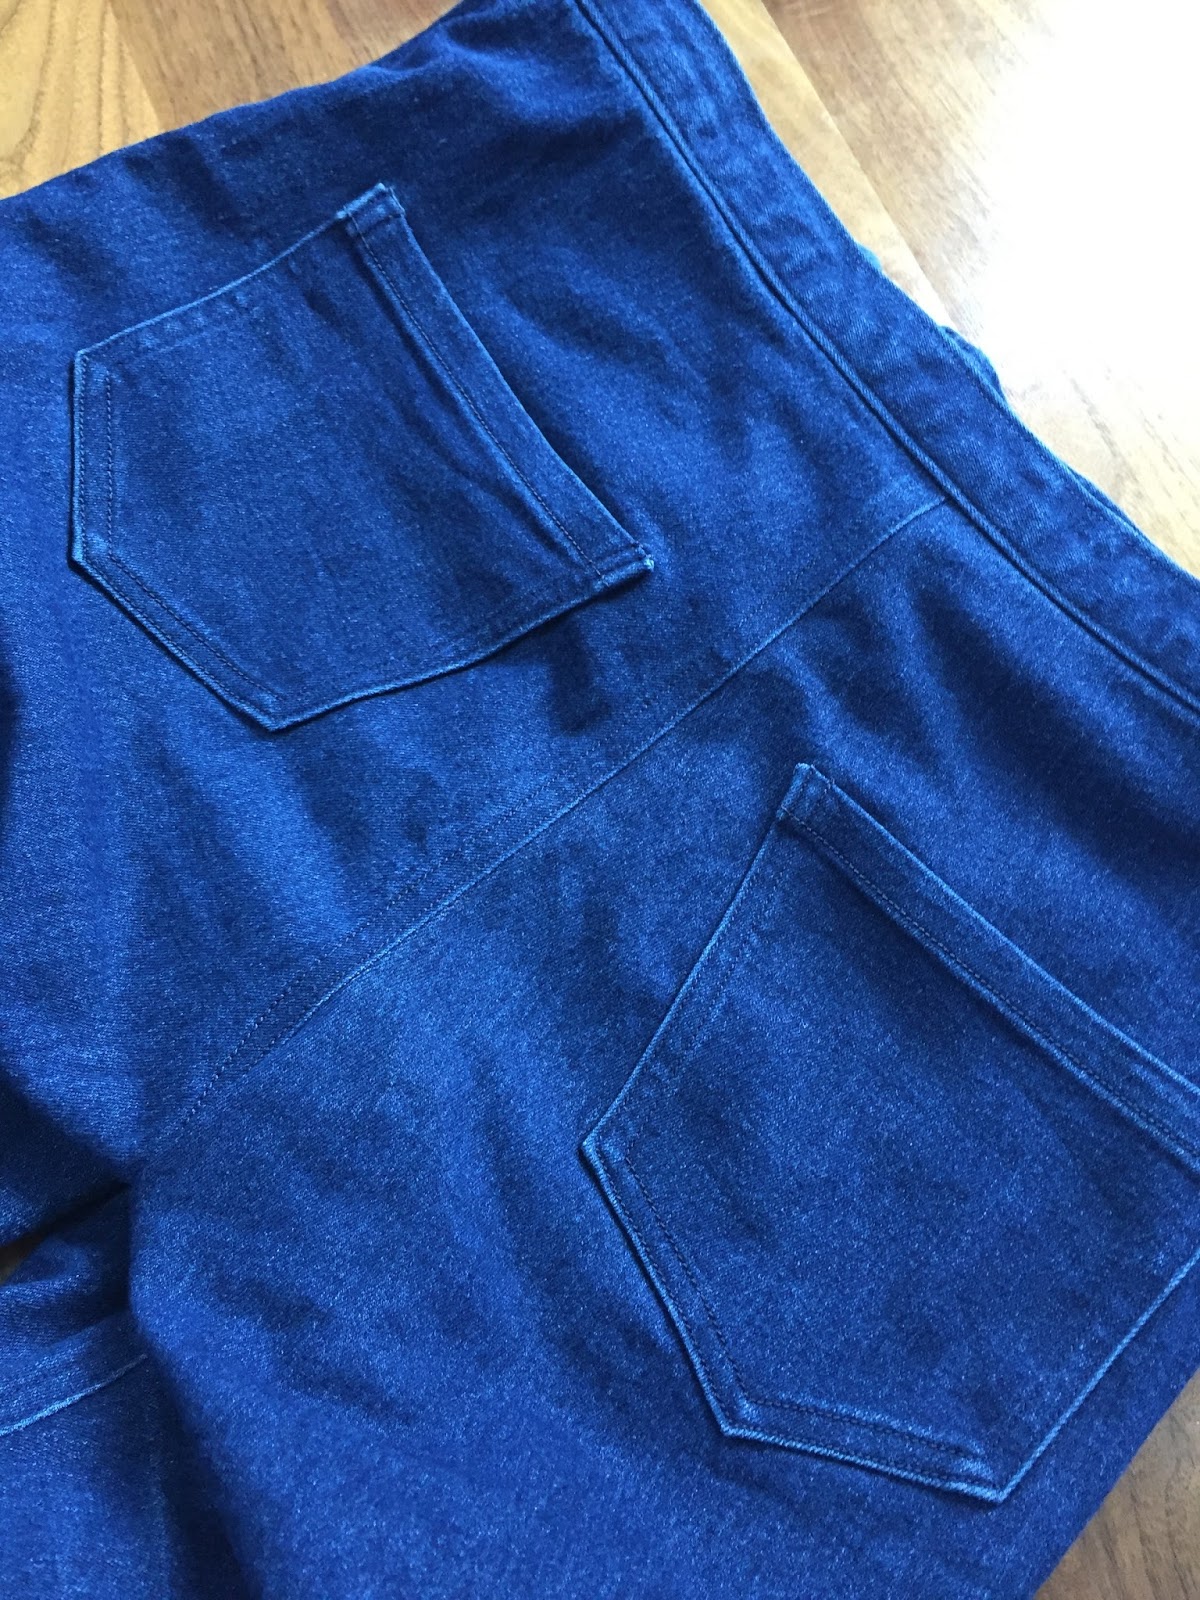 Diary of a Chain Stitcher : Pattern Testing: Mia Jeans from Sew Over It